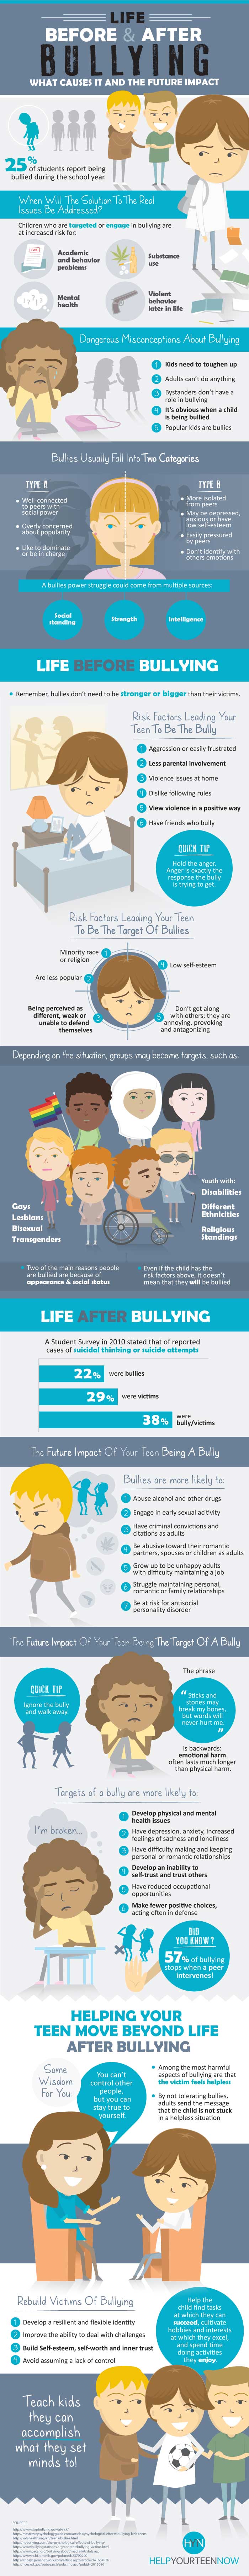 Life-Before-And-After-Bullying-Infographic-What-Causes-It-And-The-Future-Impact